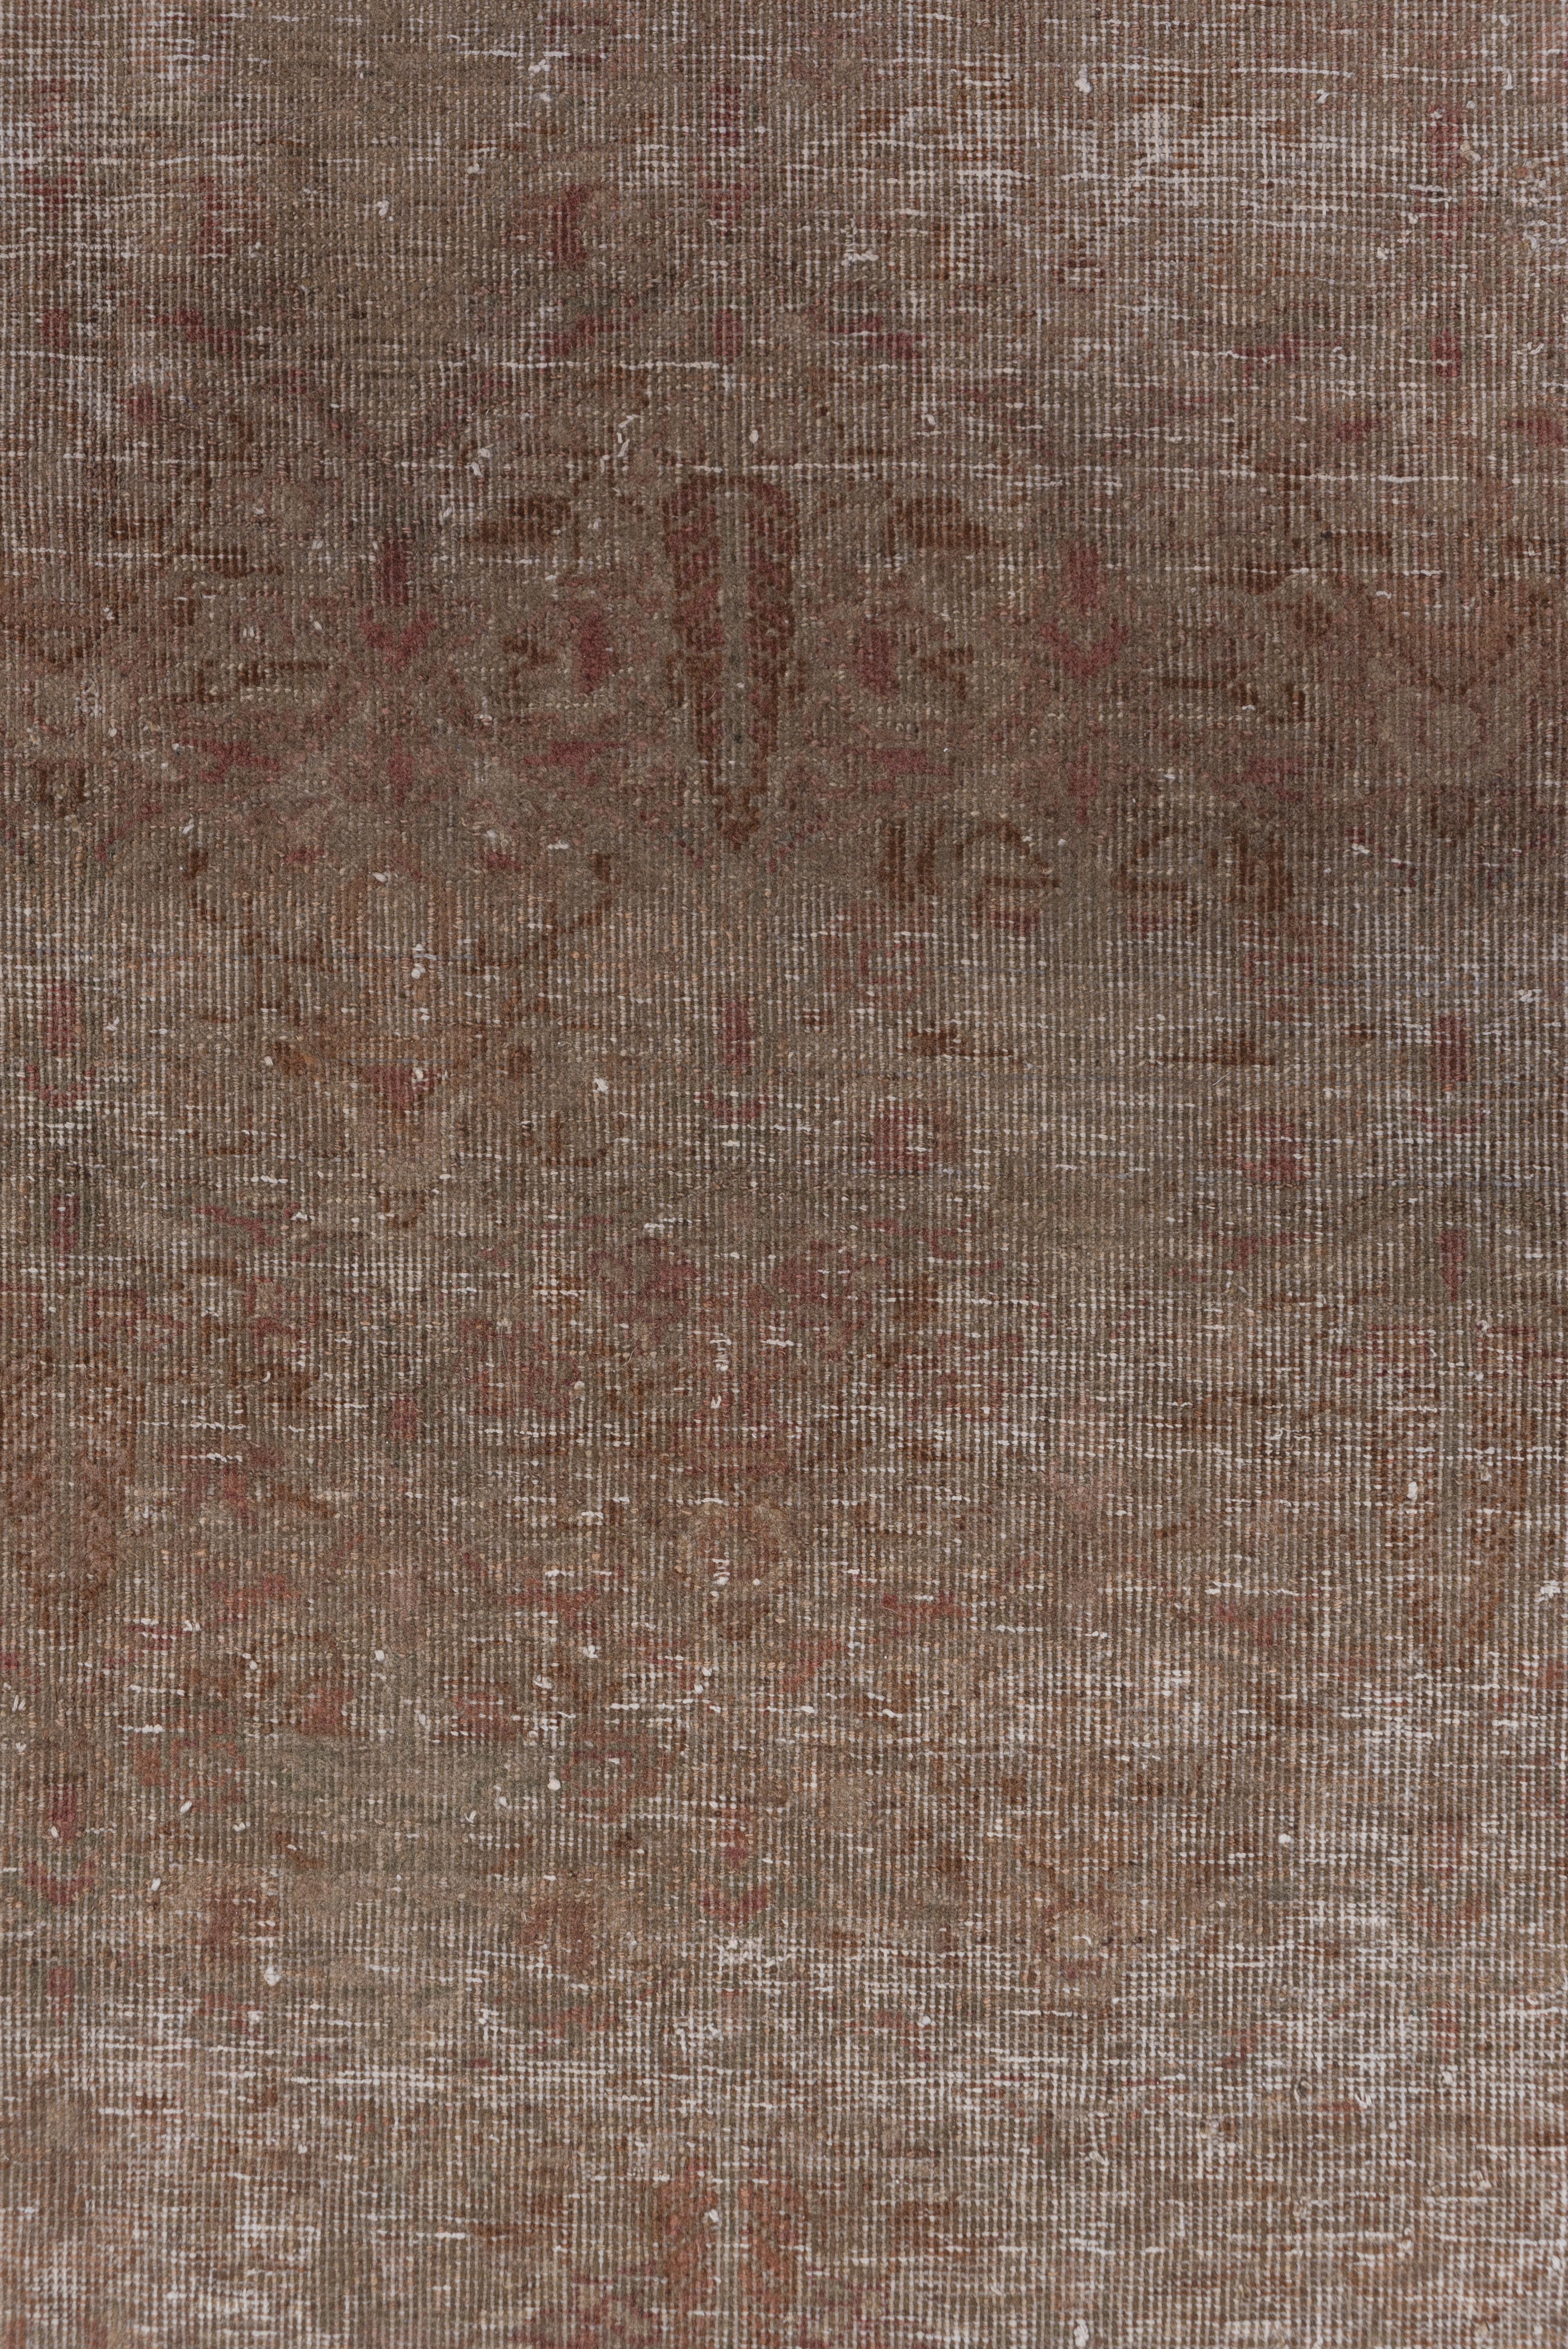 This distressed northern Indian town carpet shows a tone-one-tone small pattern of cypresses and palmettes within a close honeycomb lattice on a mauve-pink abrashed ground.